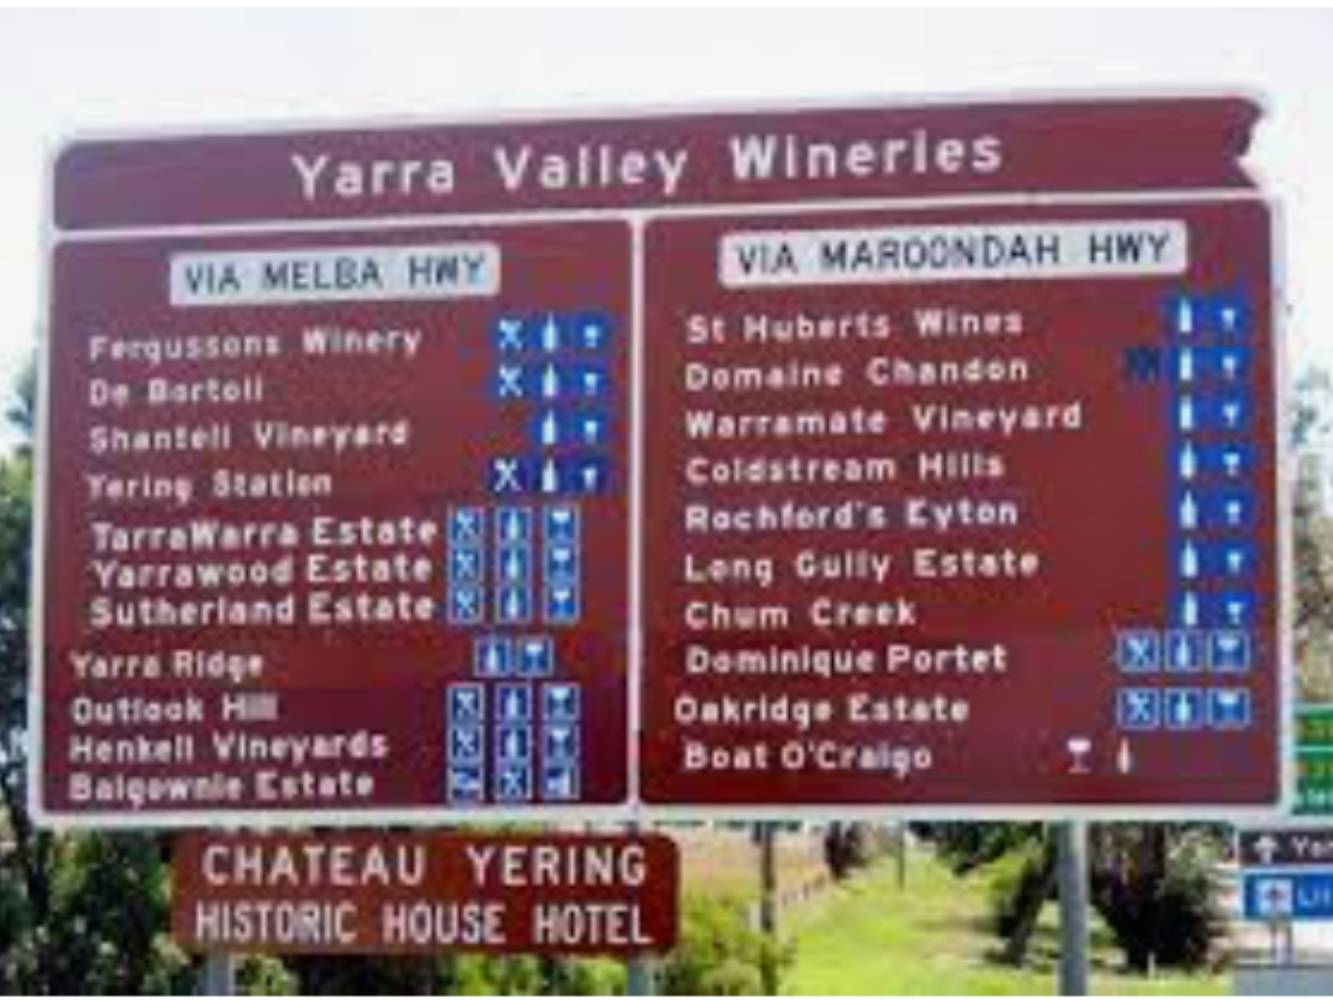 Short trip to the Yarra Valley